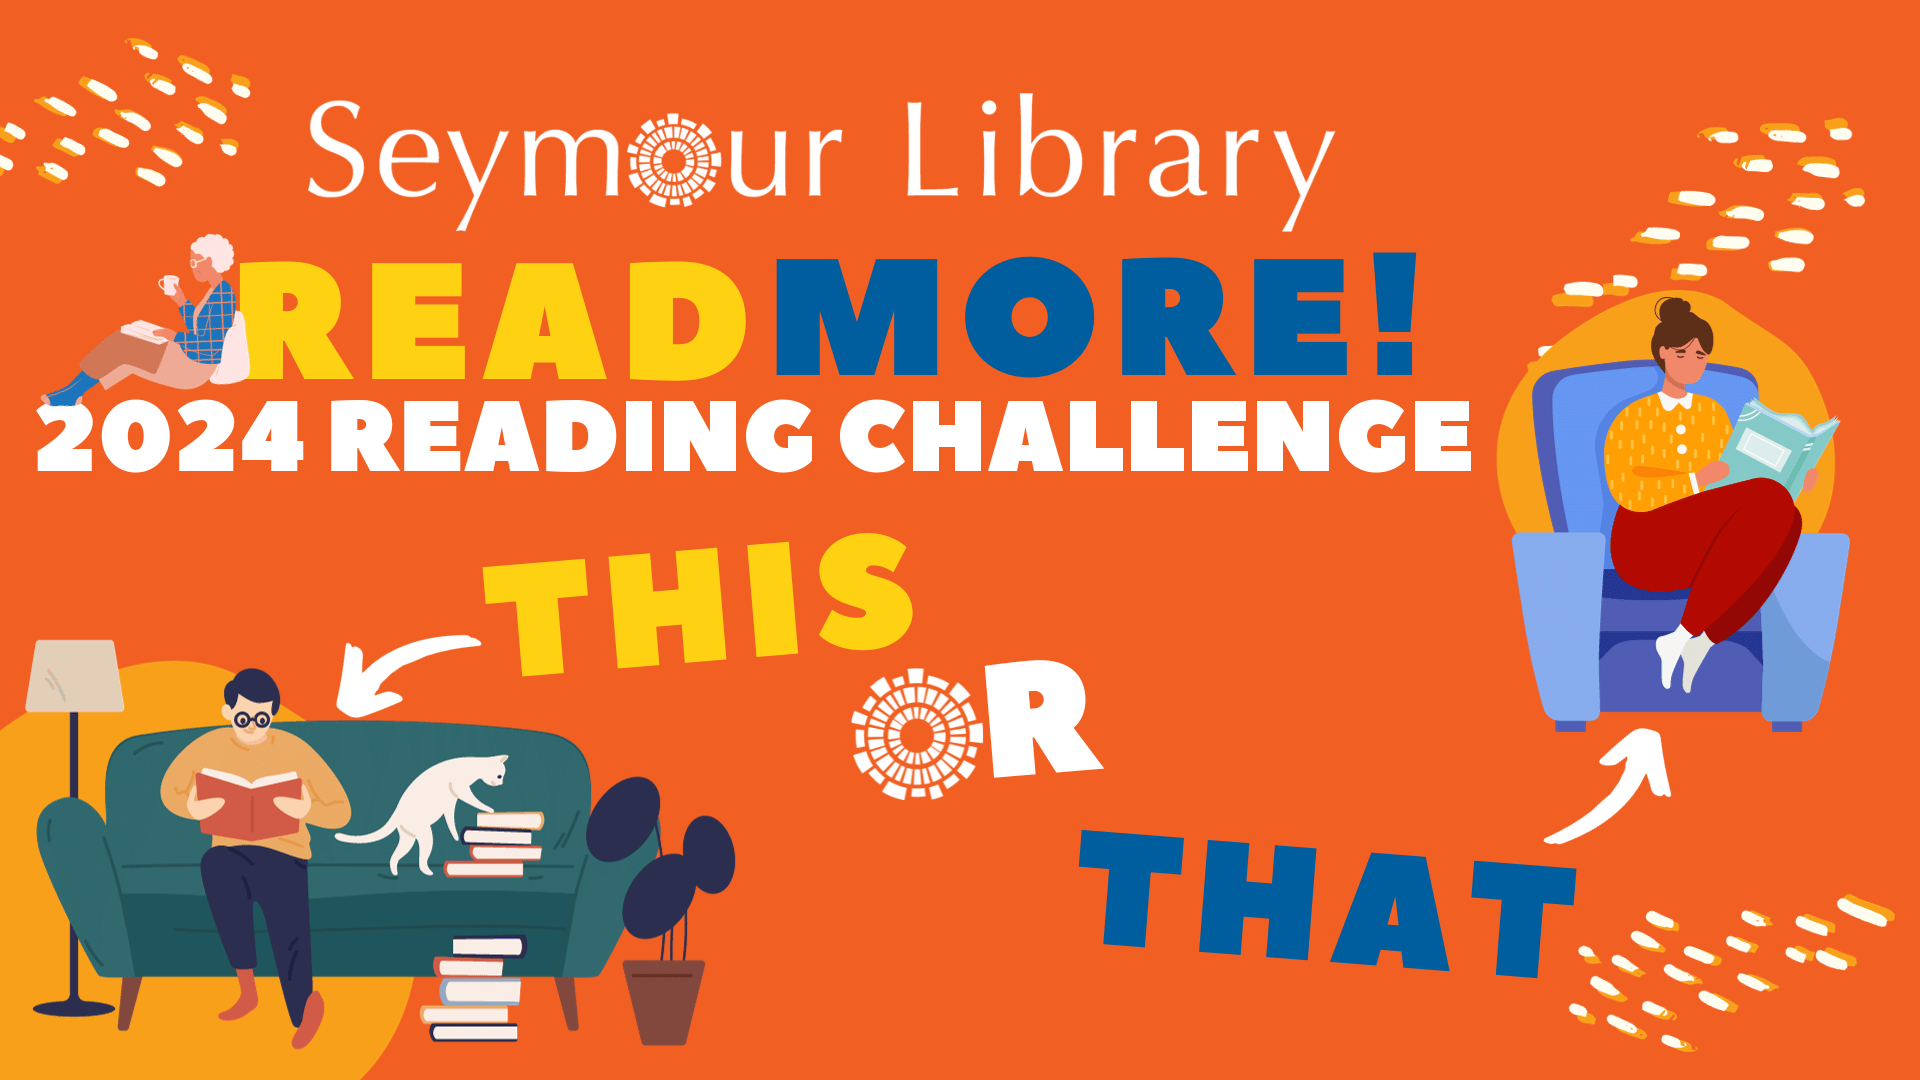 Read More 2024 Reading Challenge featuring grapic with stylized people reading books, and Seymour Library logo.